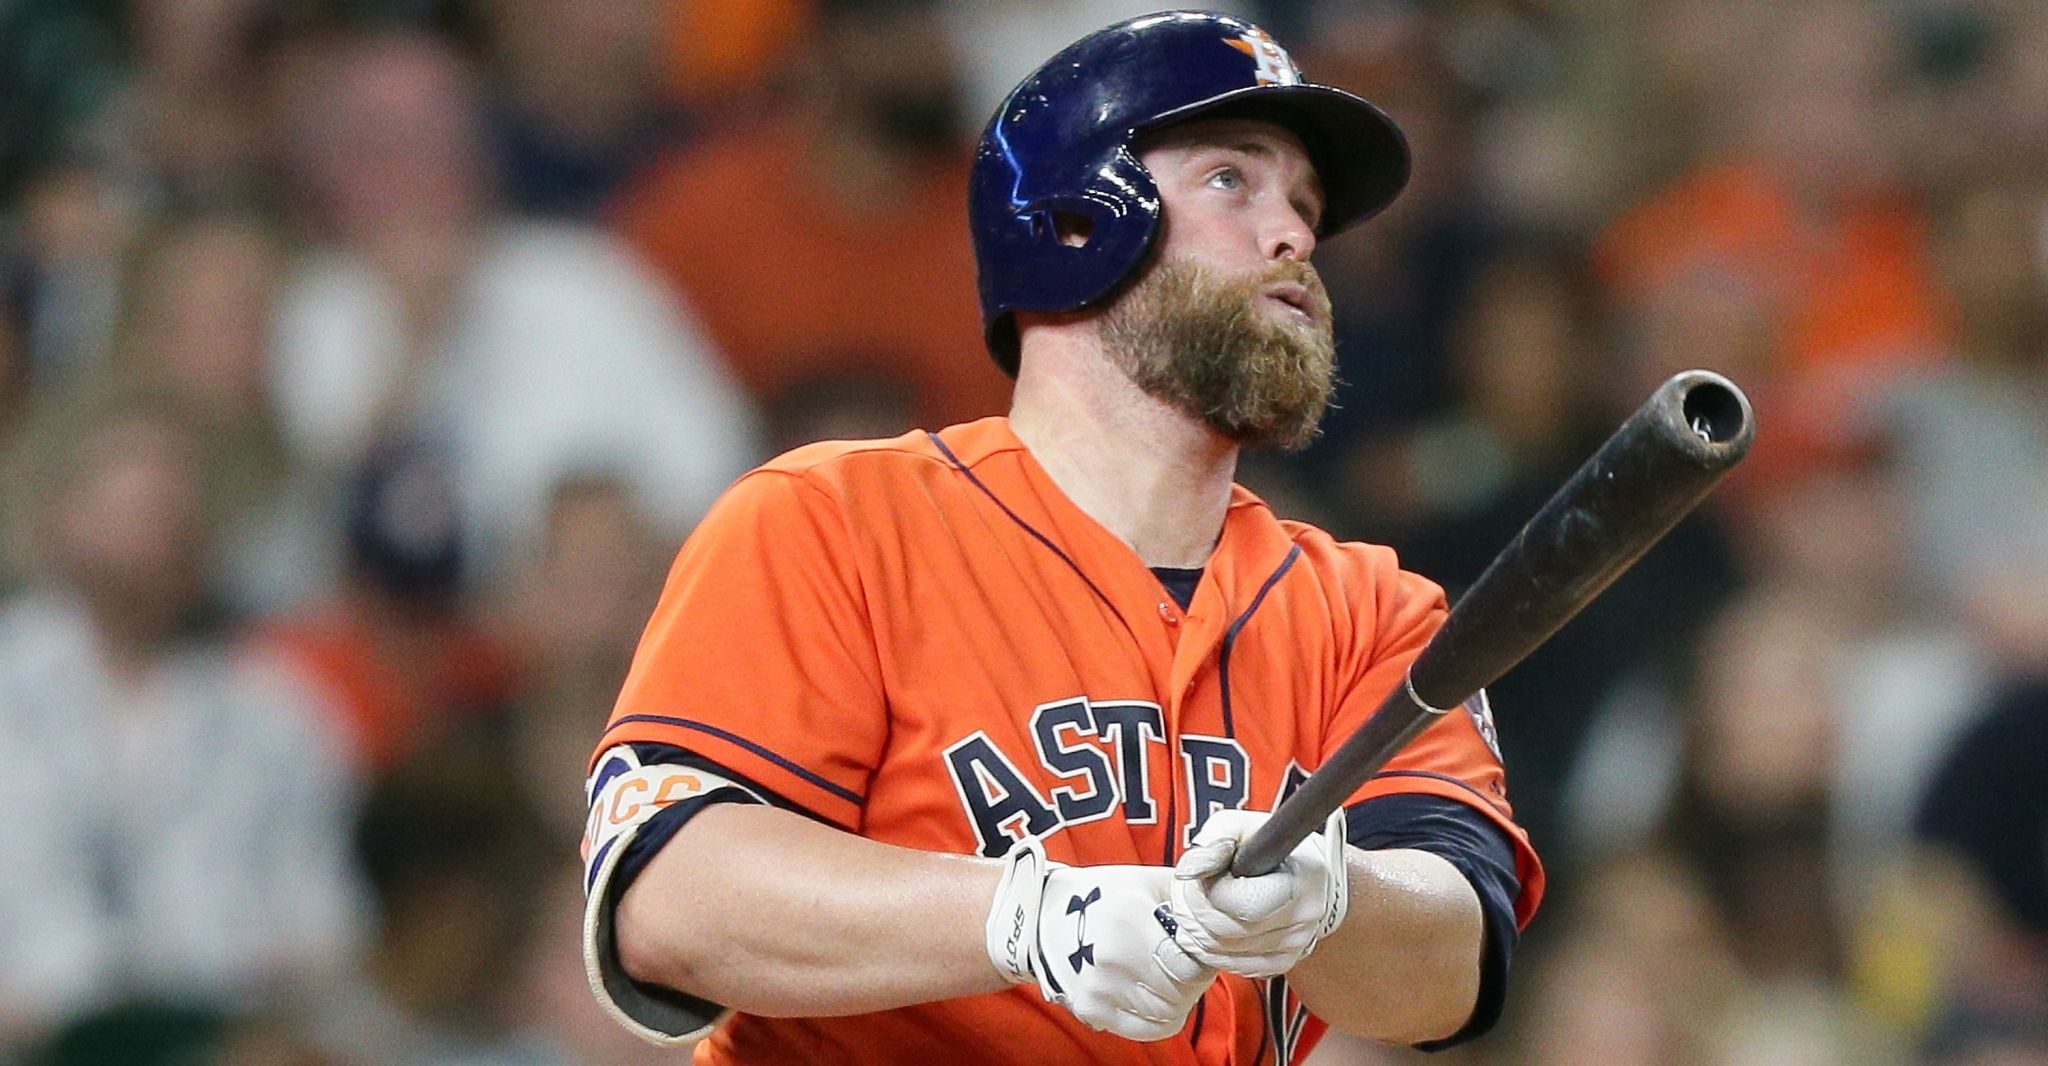 Adjusted swing making Astros' Brian McCann a force against lefthanders - Houston Chronicle2048 x 1066